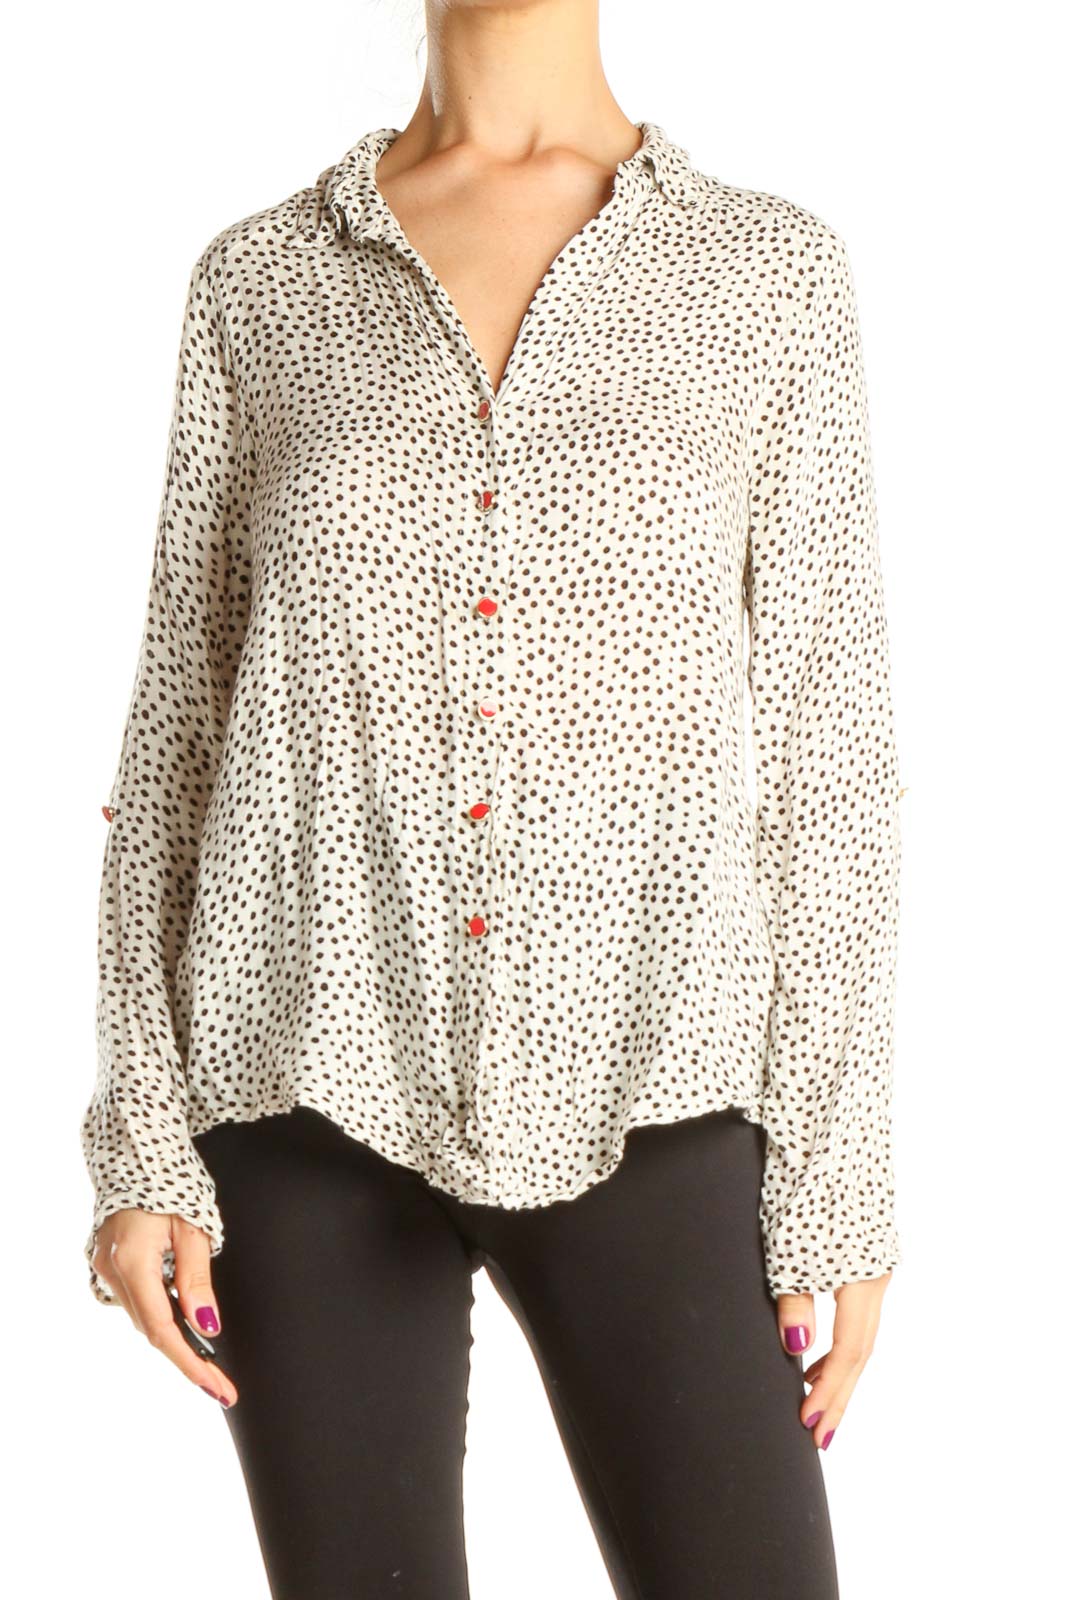 White Black Polka Dot All Day Wear Top Front